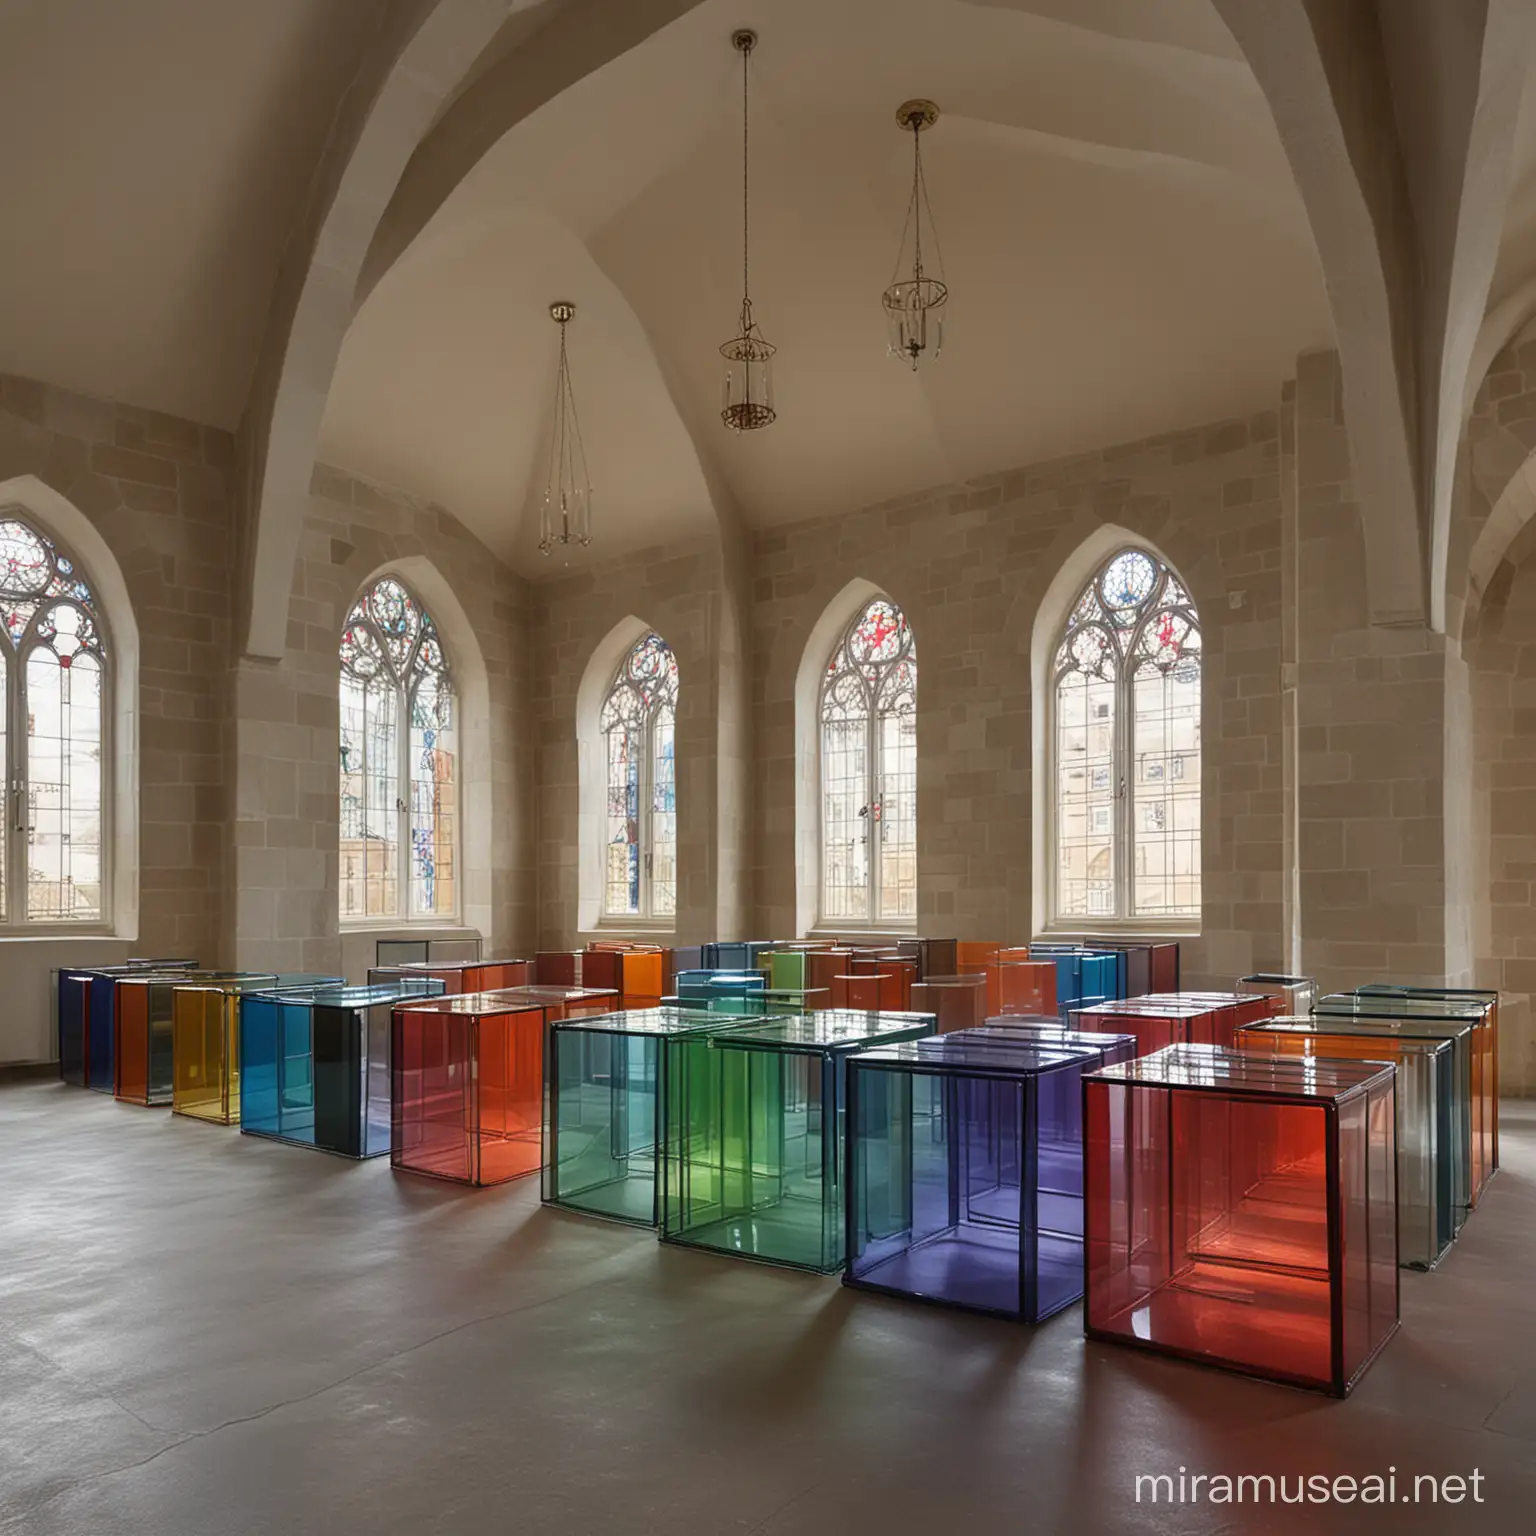 Historic Church Setting with Colorful Glass Office Cubes